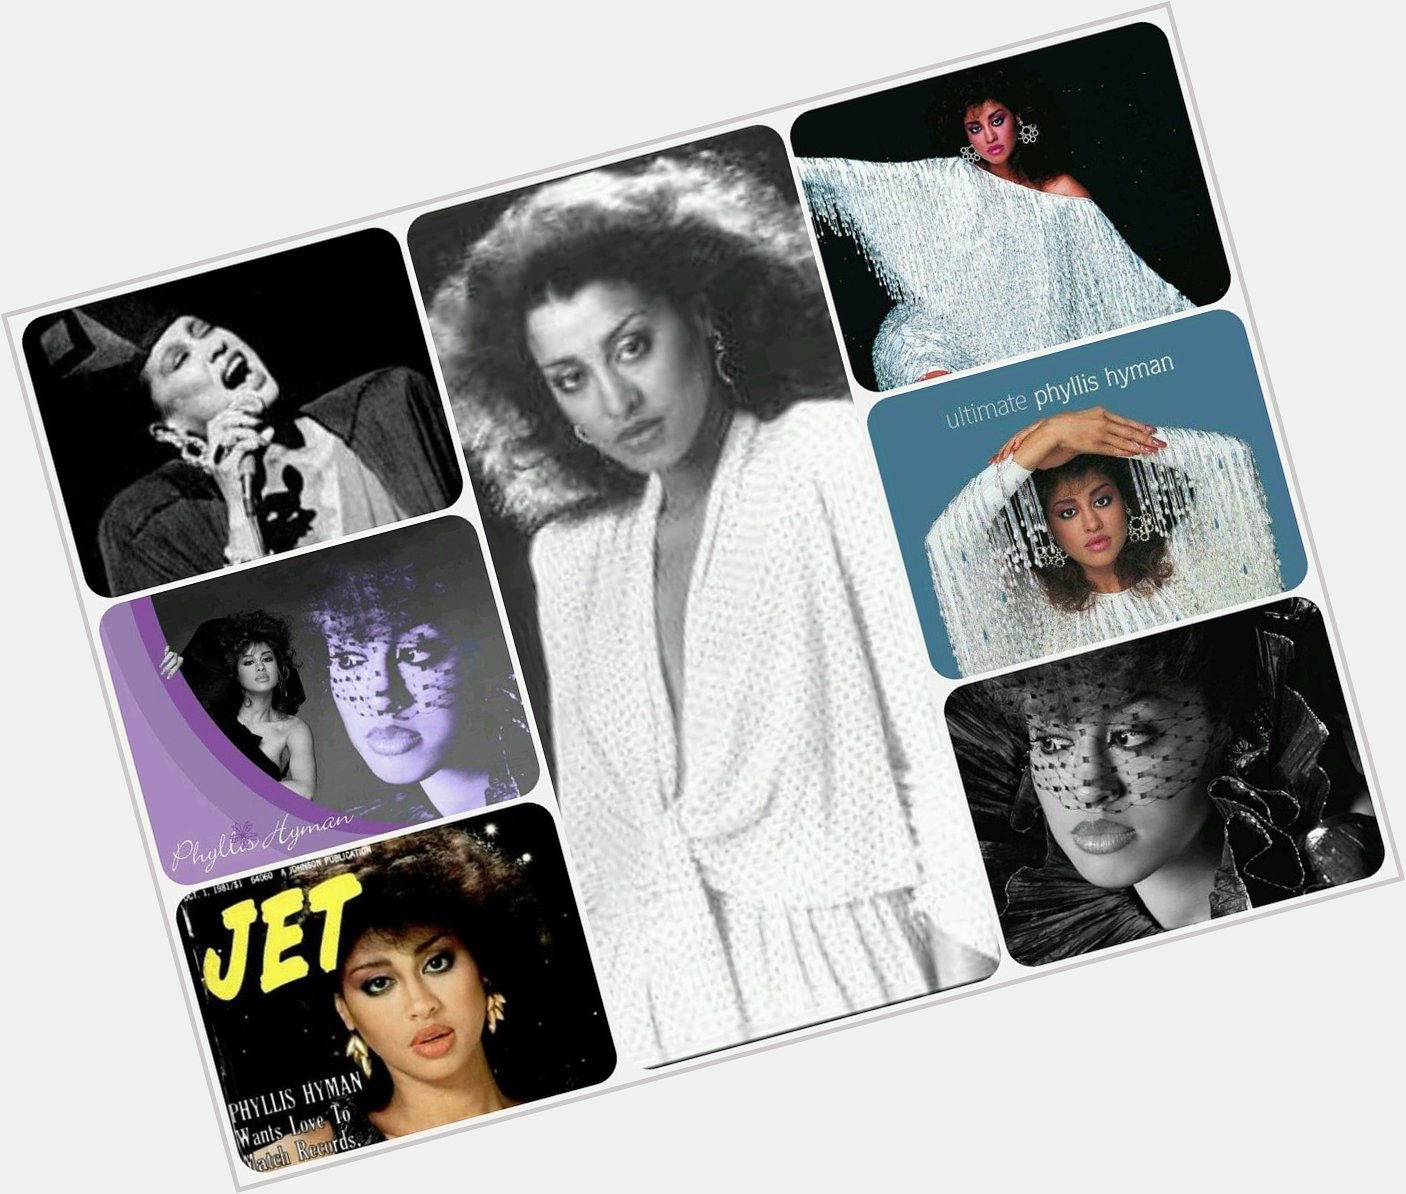 Happy 68th birthday to Phyllis Hyman
Actress/model/and one of the best female vocalist! 